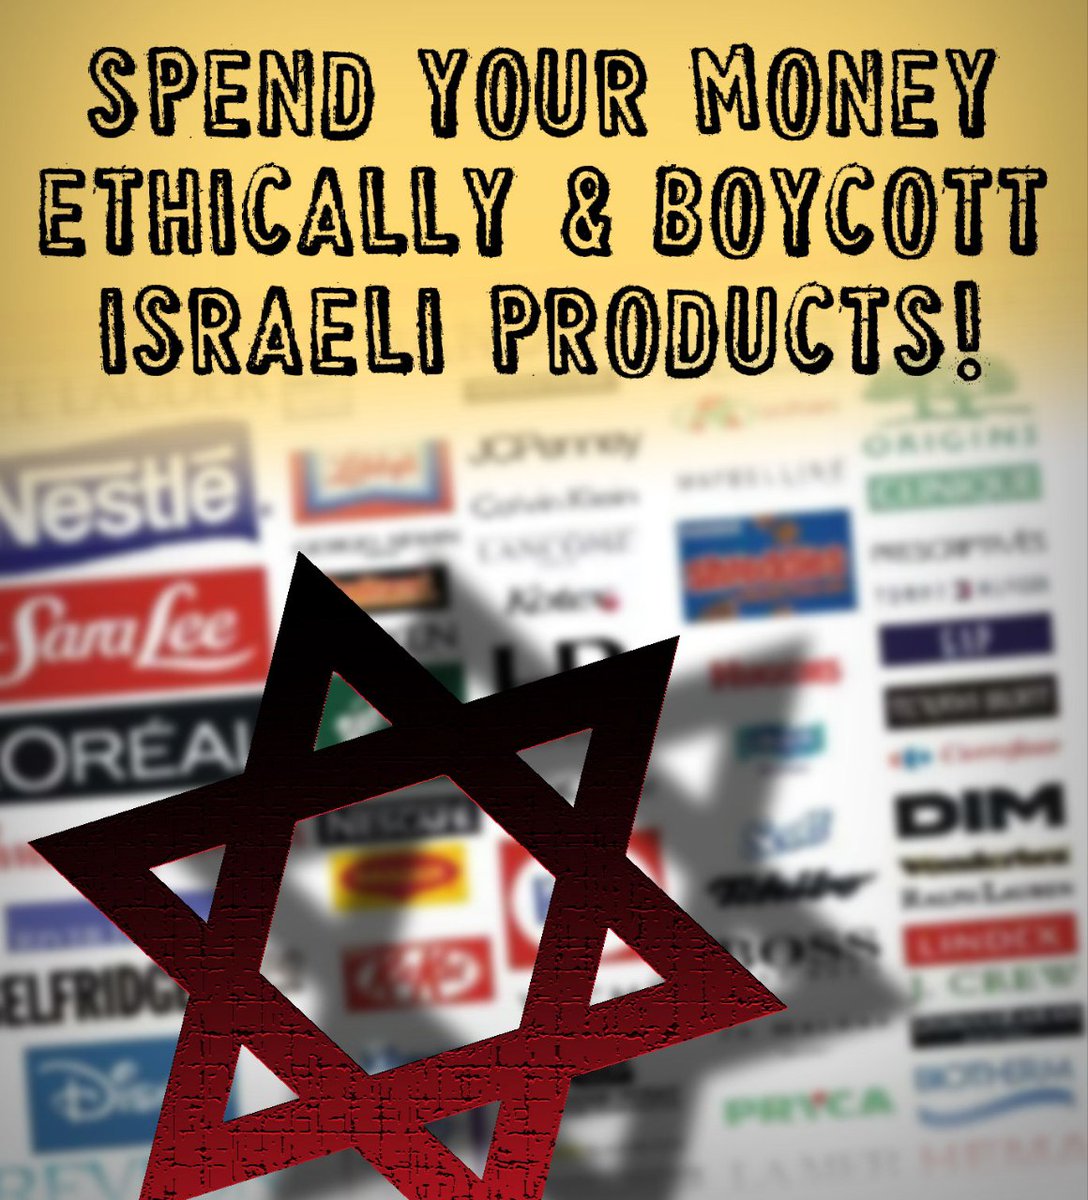 Cease-fire now #BDS #BoycottIsraeliProducts